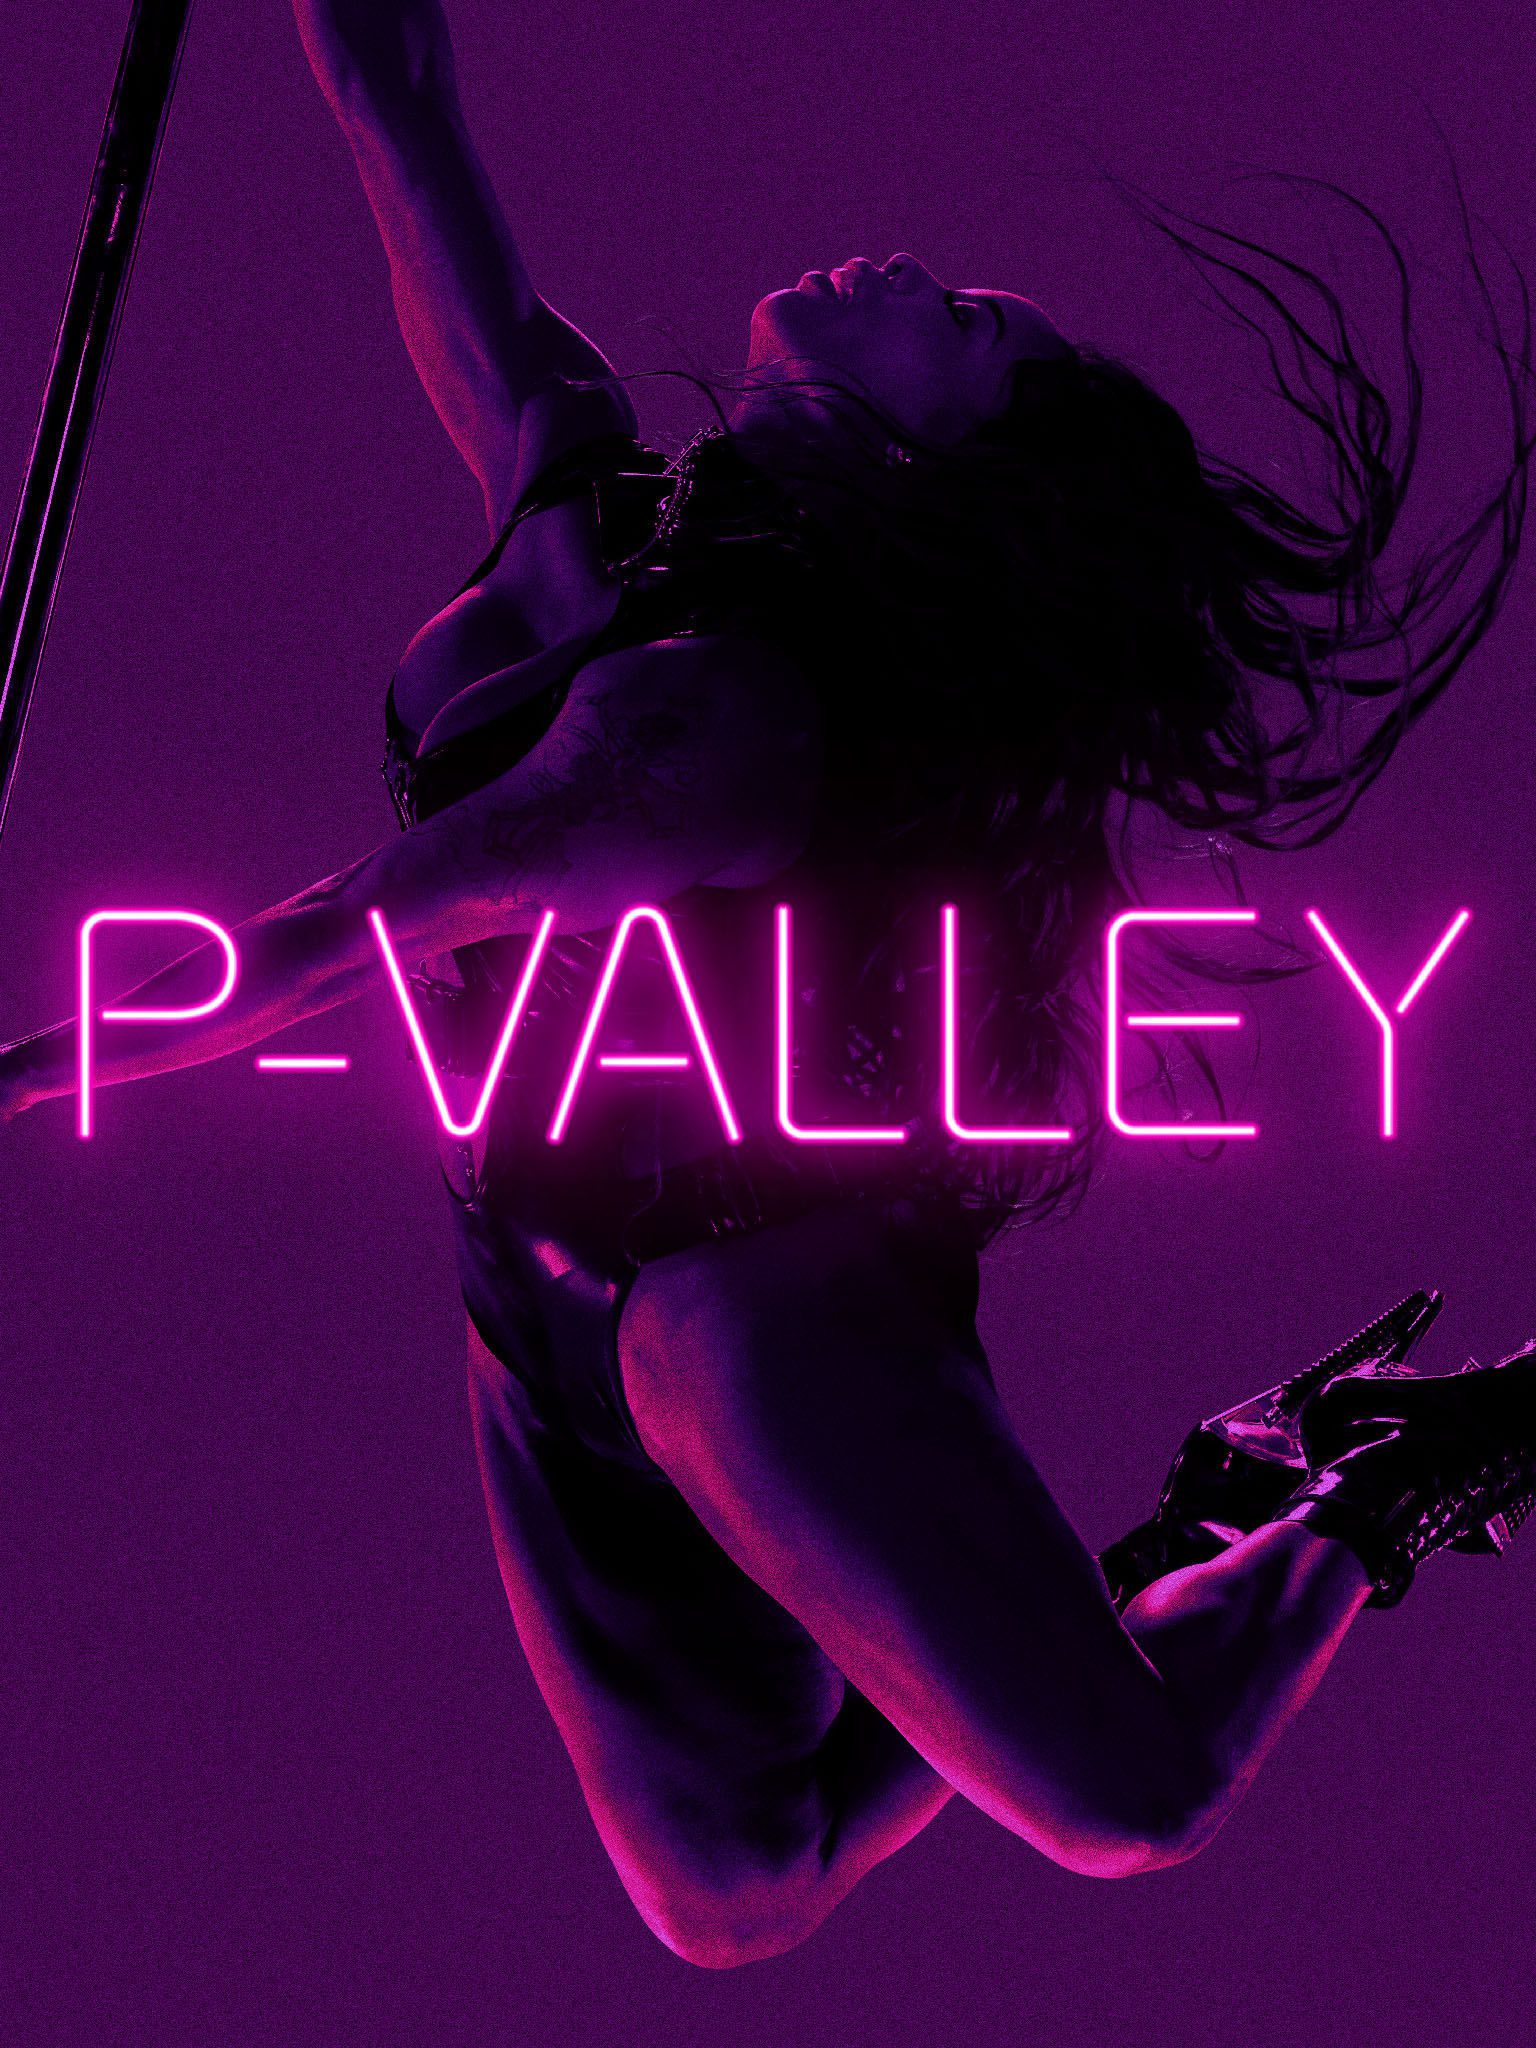 P-Valley teaser image